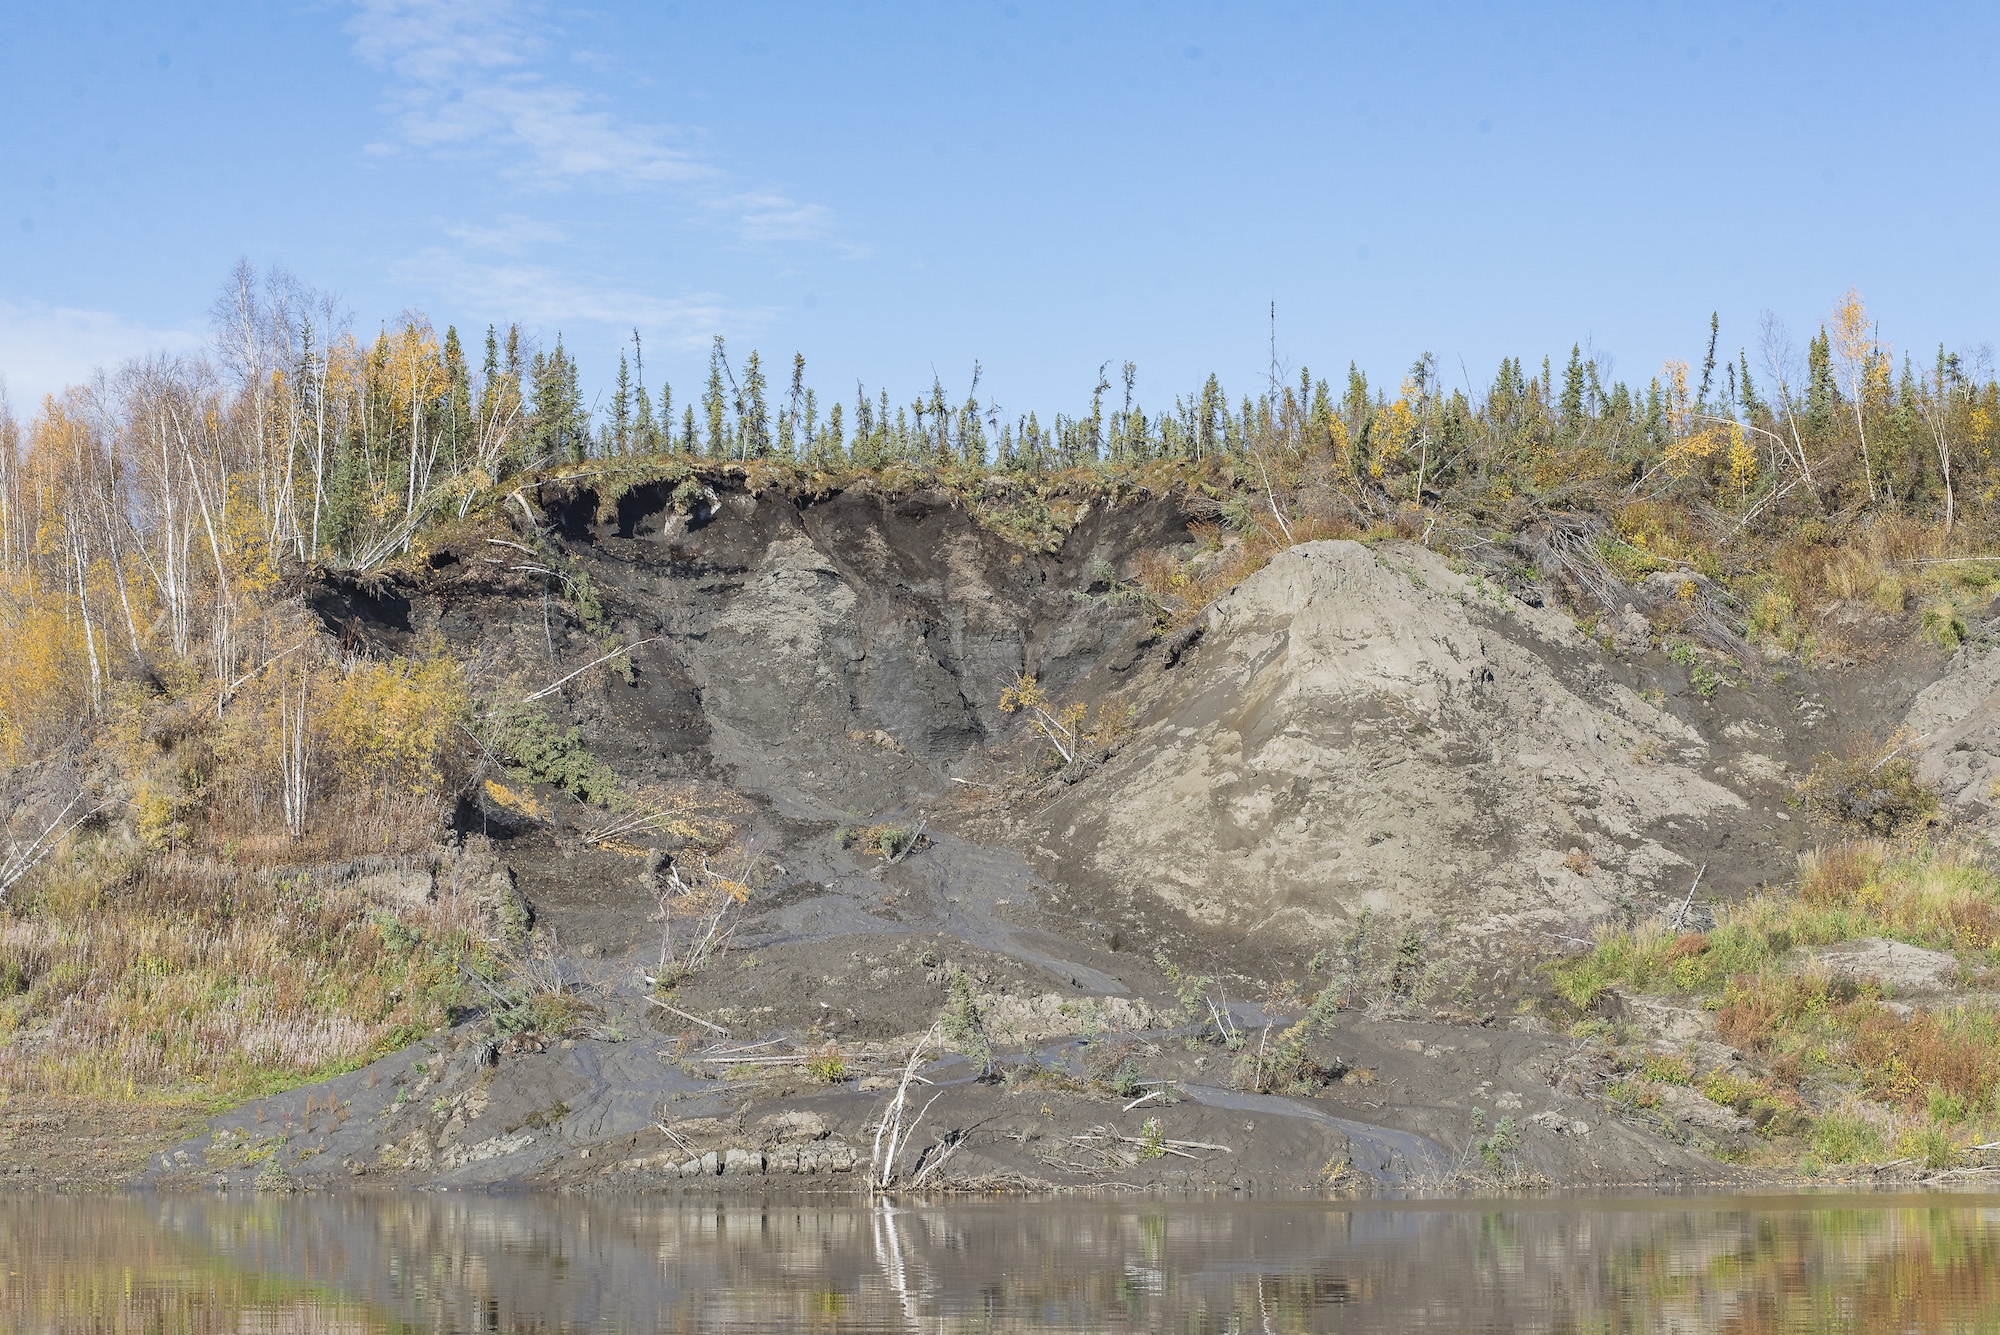 On the banks of the Porcupine 160 km upriver is a giant mudslide, a result of melting permafrost.